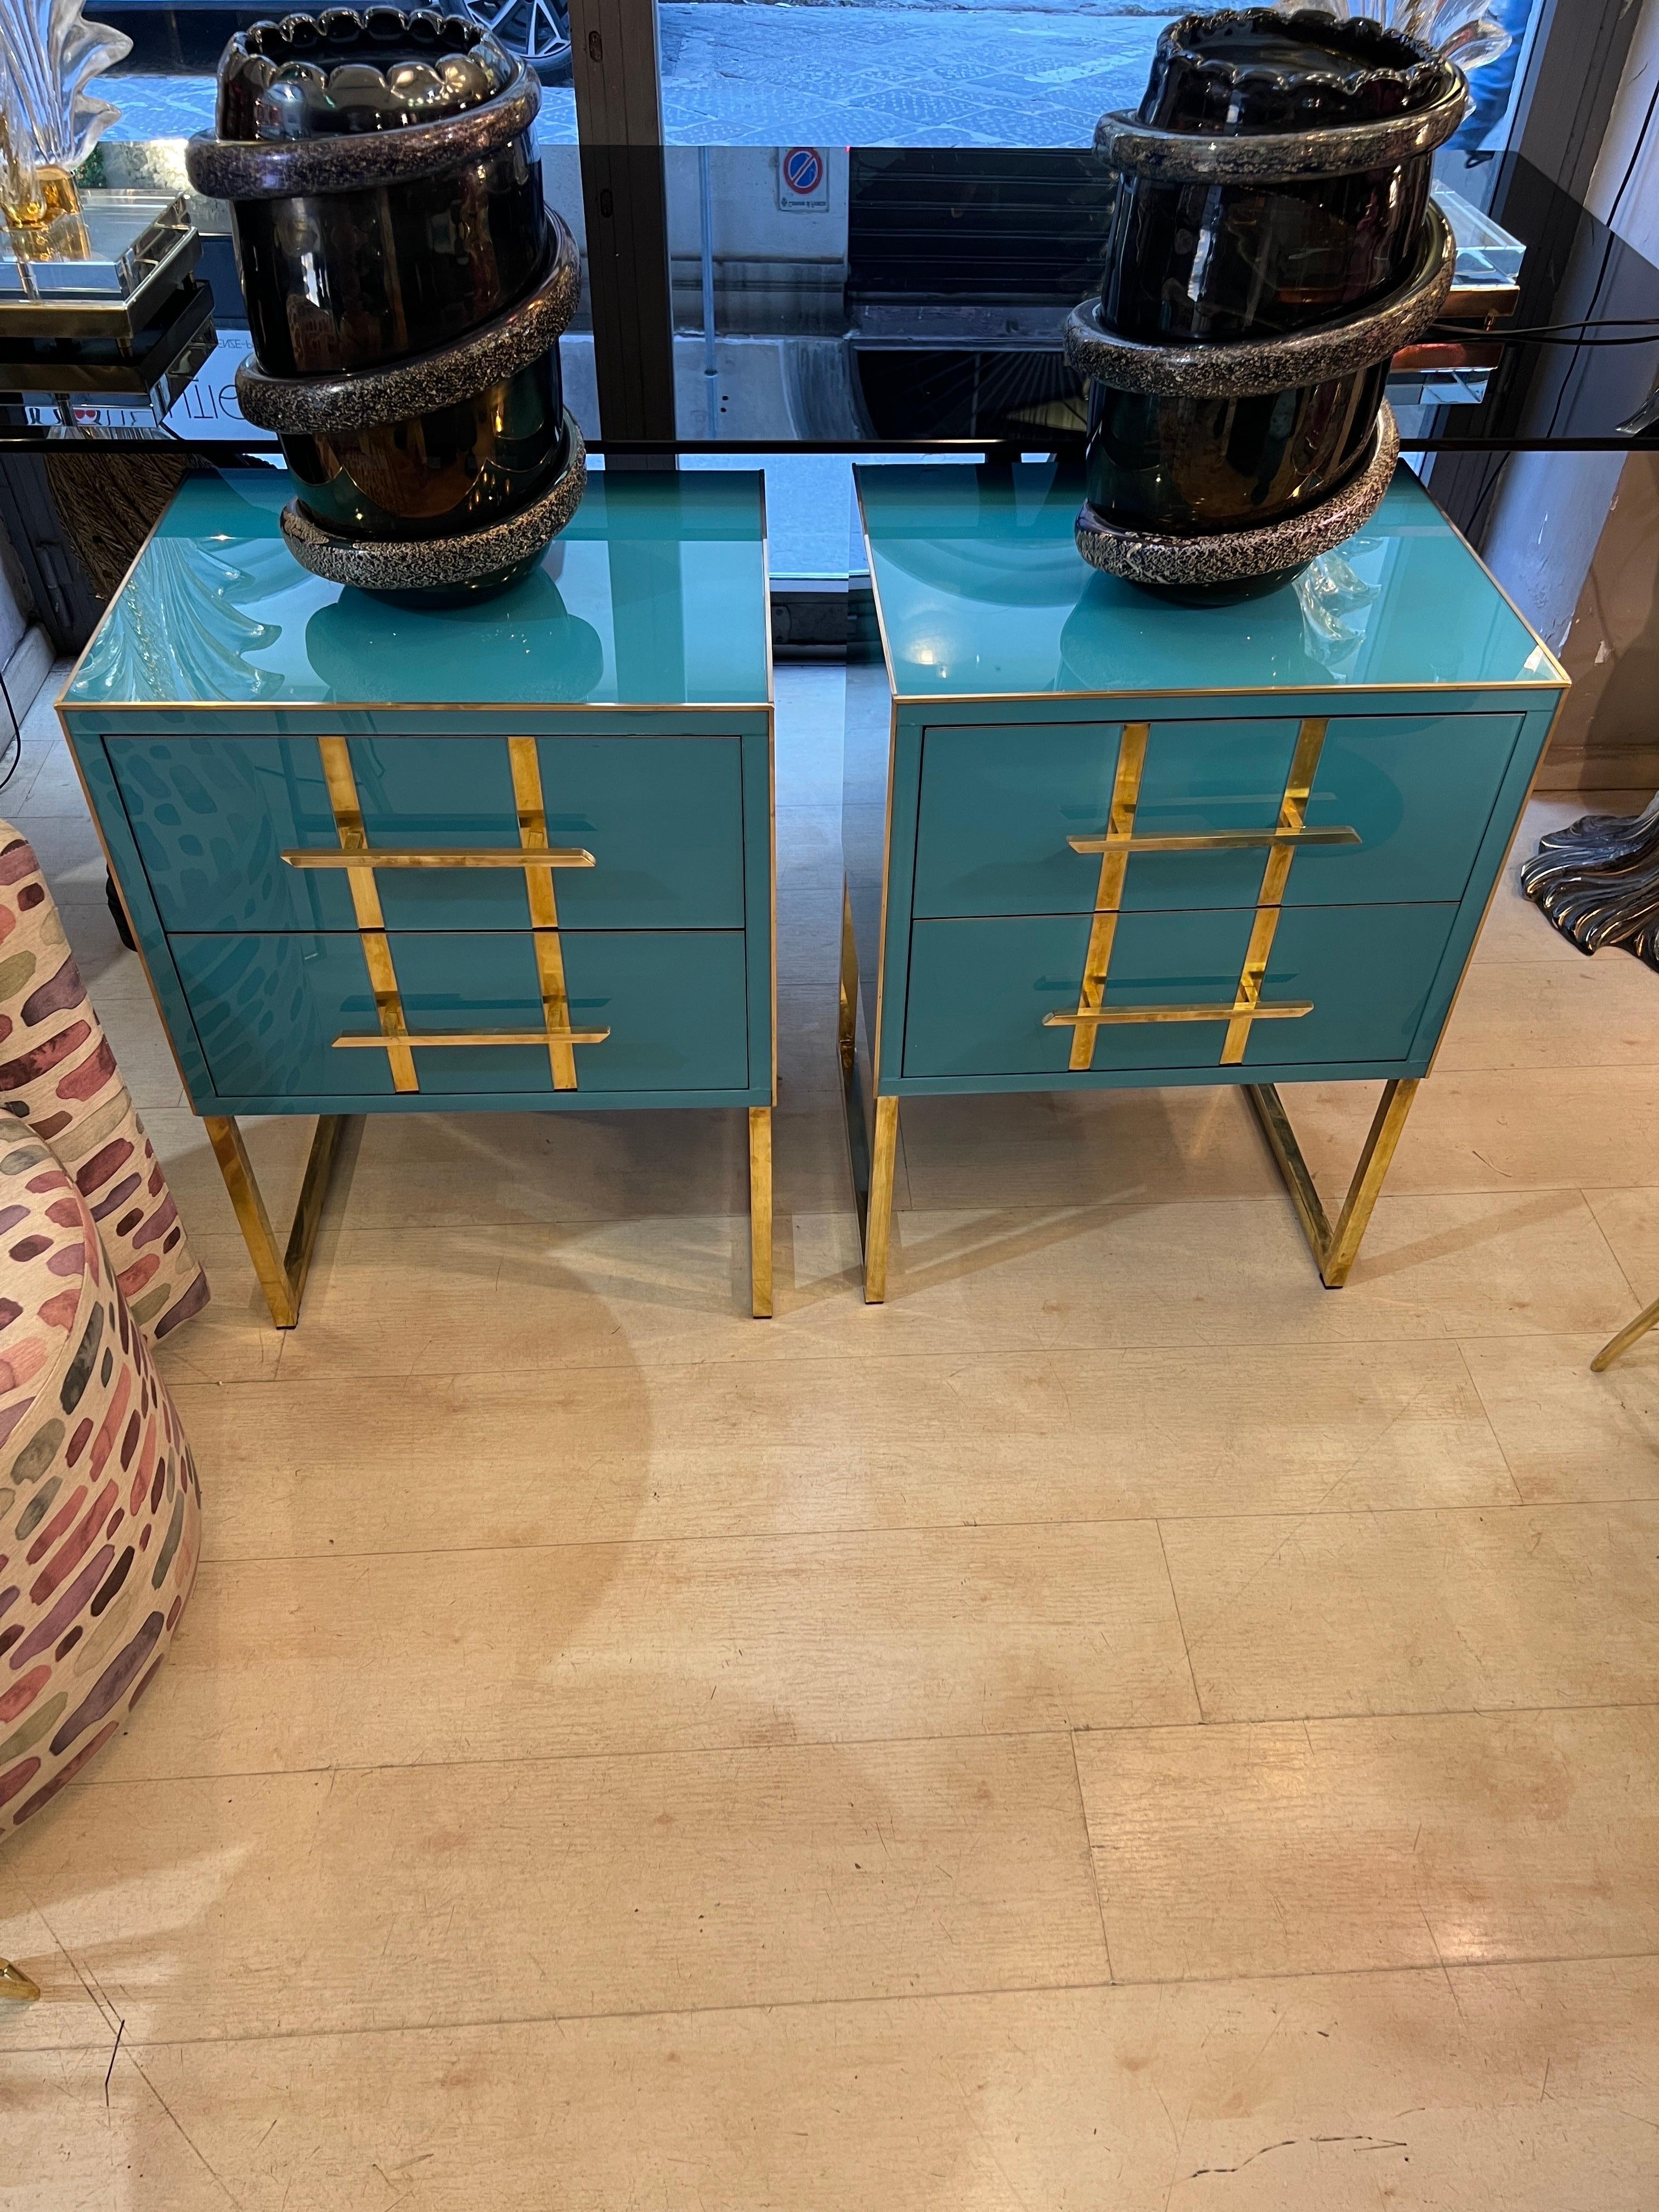 Modern Vintage Turquoise Opaline Glass Nightstands, Brass Handles and Inlays, 1980 For Sale